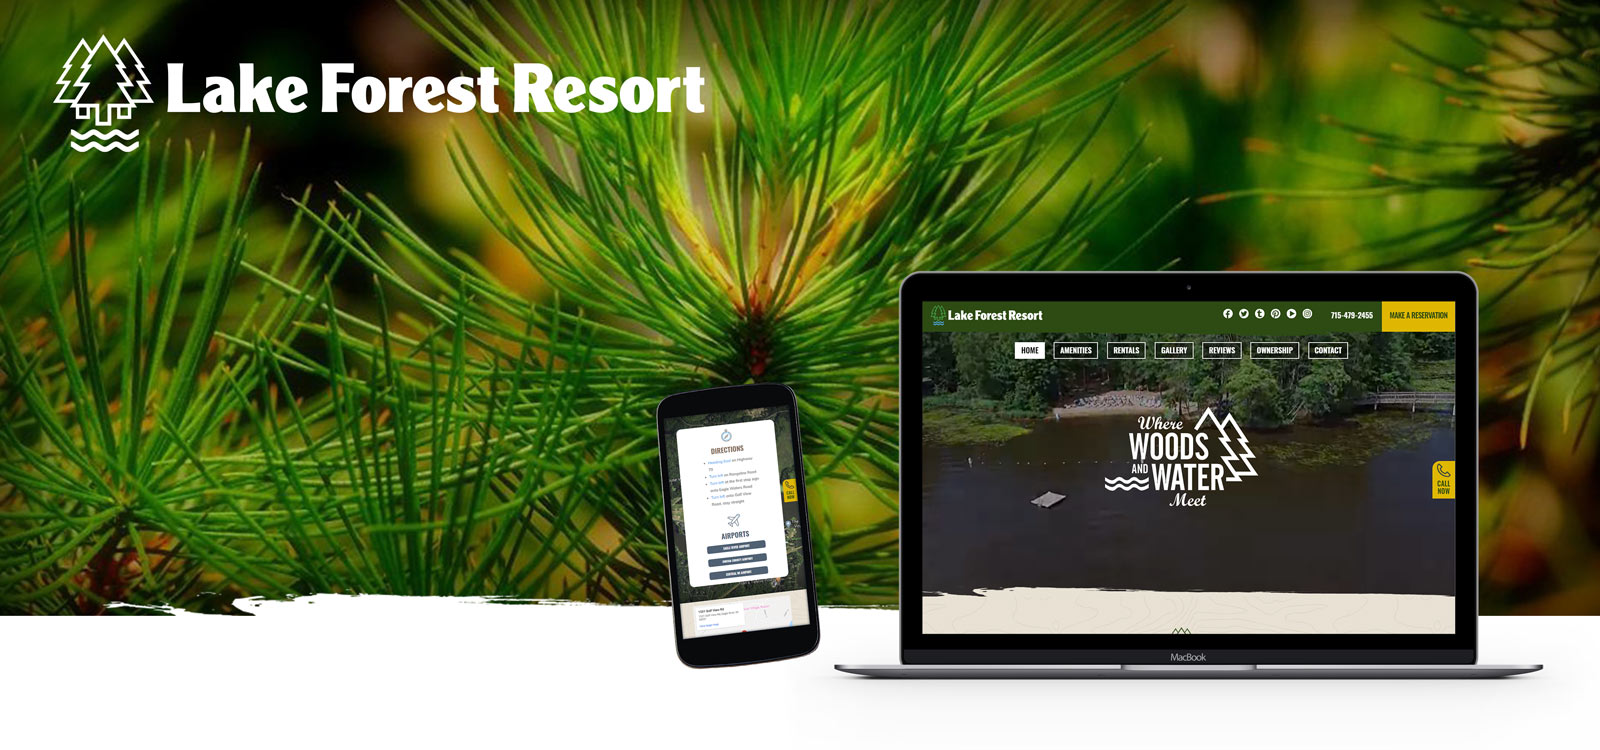 Northwoods resort by Eagle River, Wisconsin. Project: Creating a new website that truly enhances the customer experience and empowers photography.